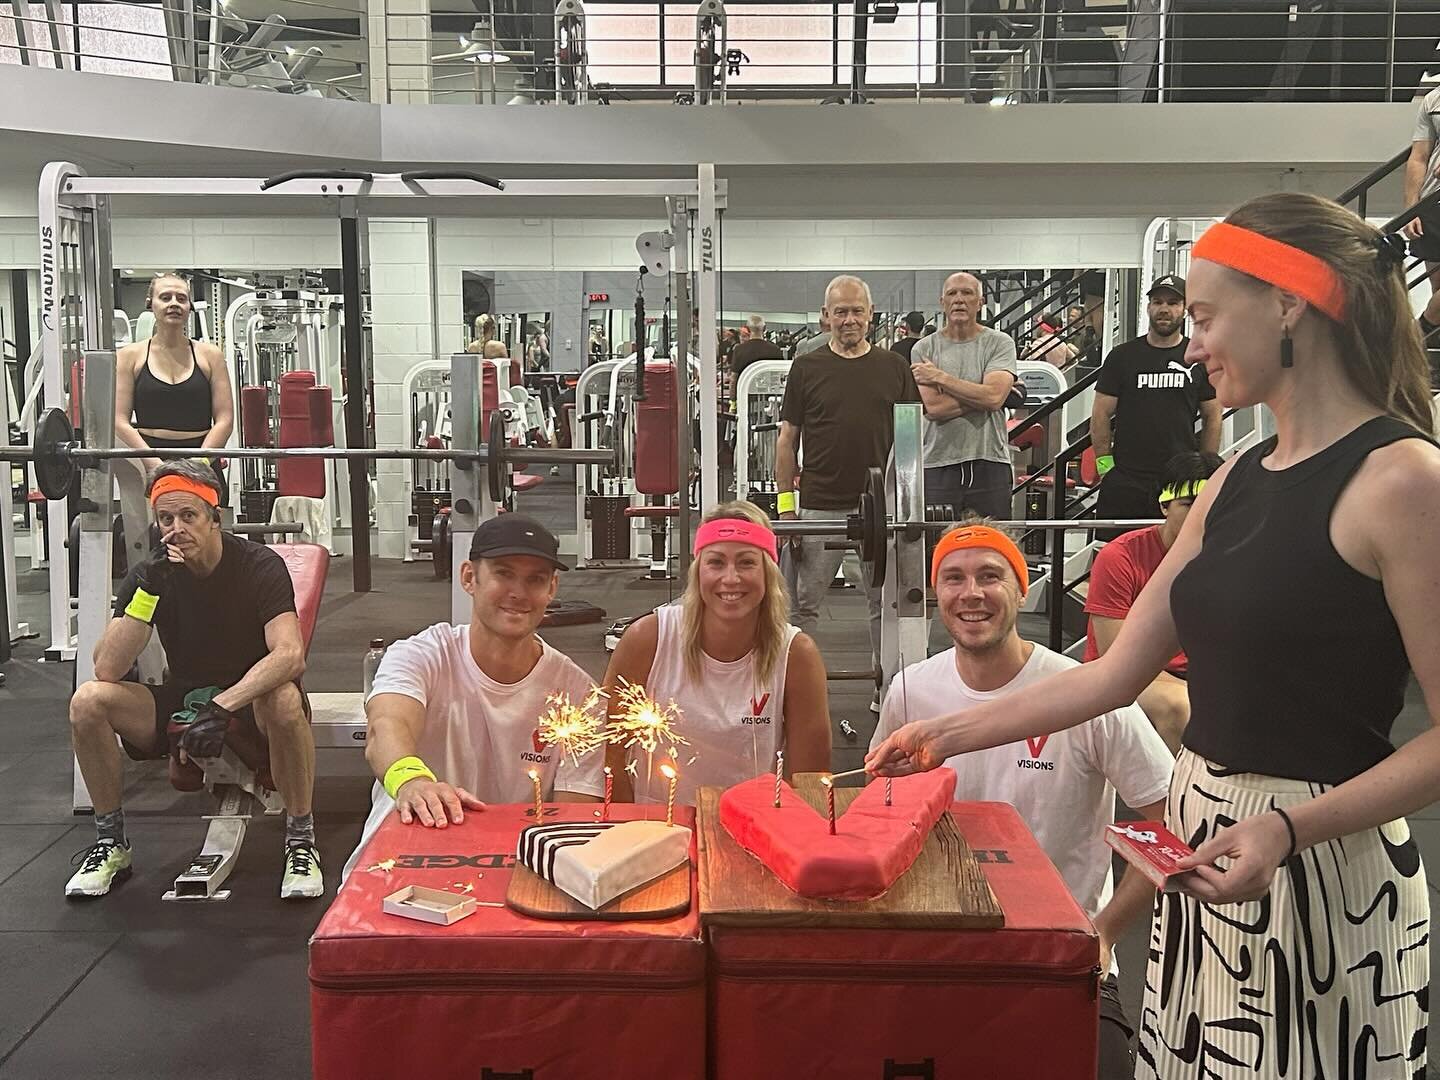 Birthday celebrations were in full swing over the weekend. Gym floor cake, daggy sweatbands, too many photos to look at and some very proud members showing their love for the place 🩷🩵💛